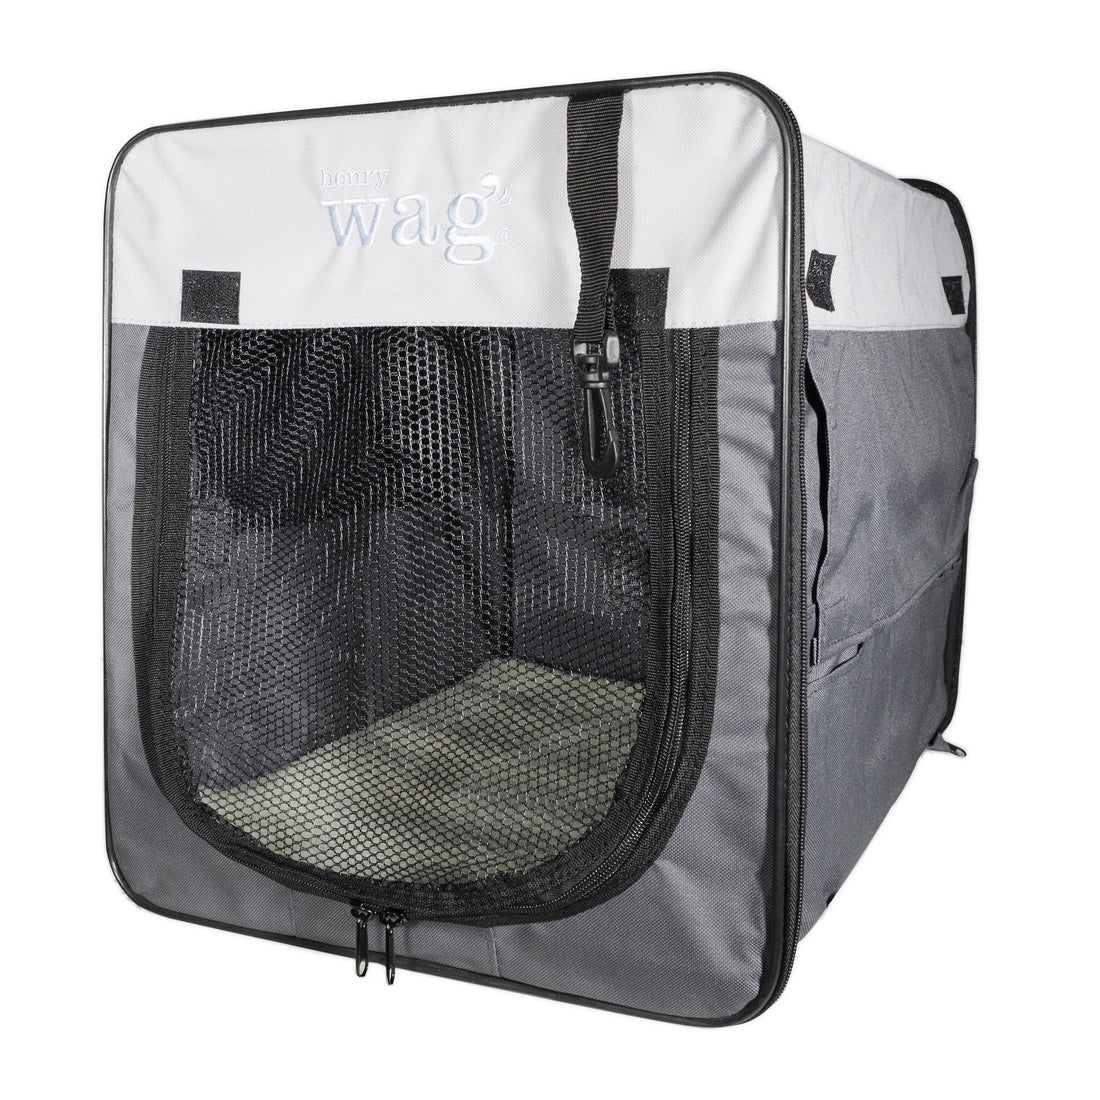 Henry-Wag-Folding-Fabric-Travel-Pet-Crate